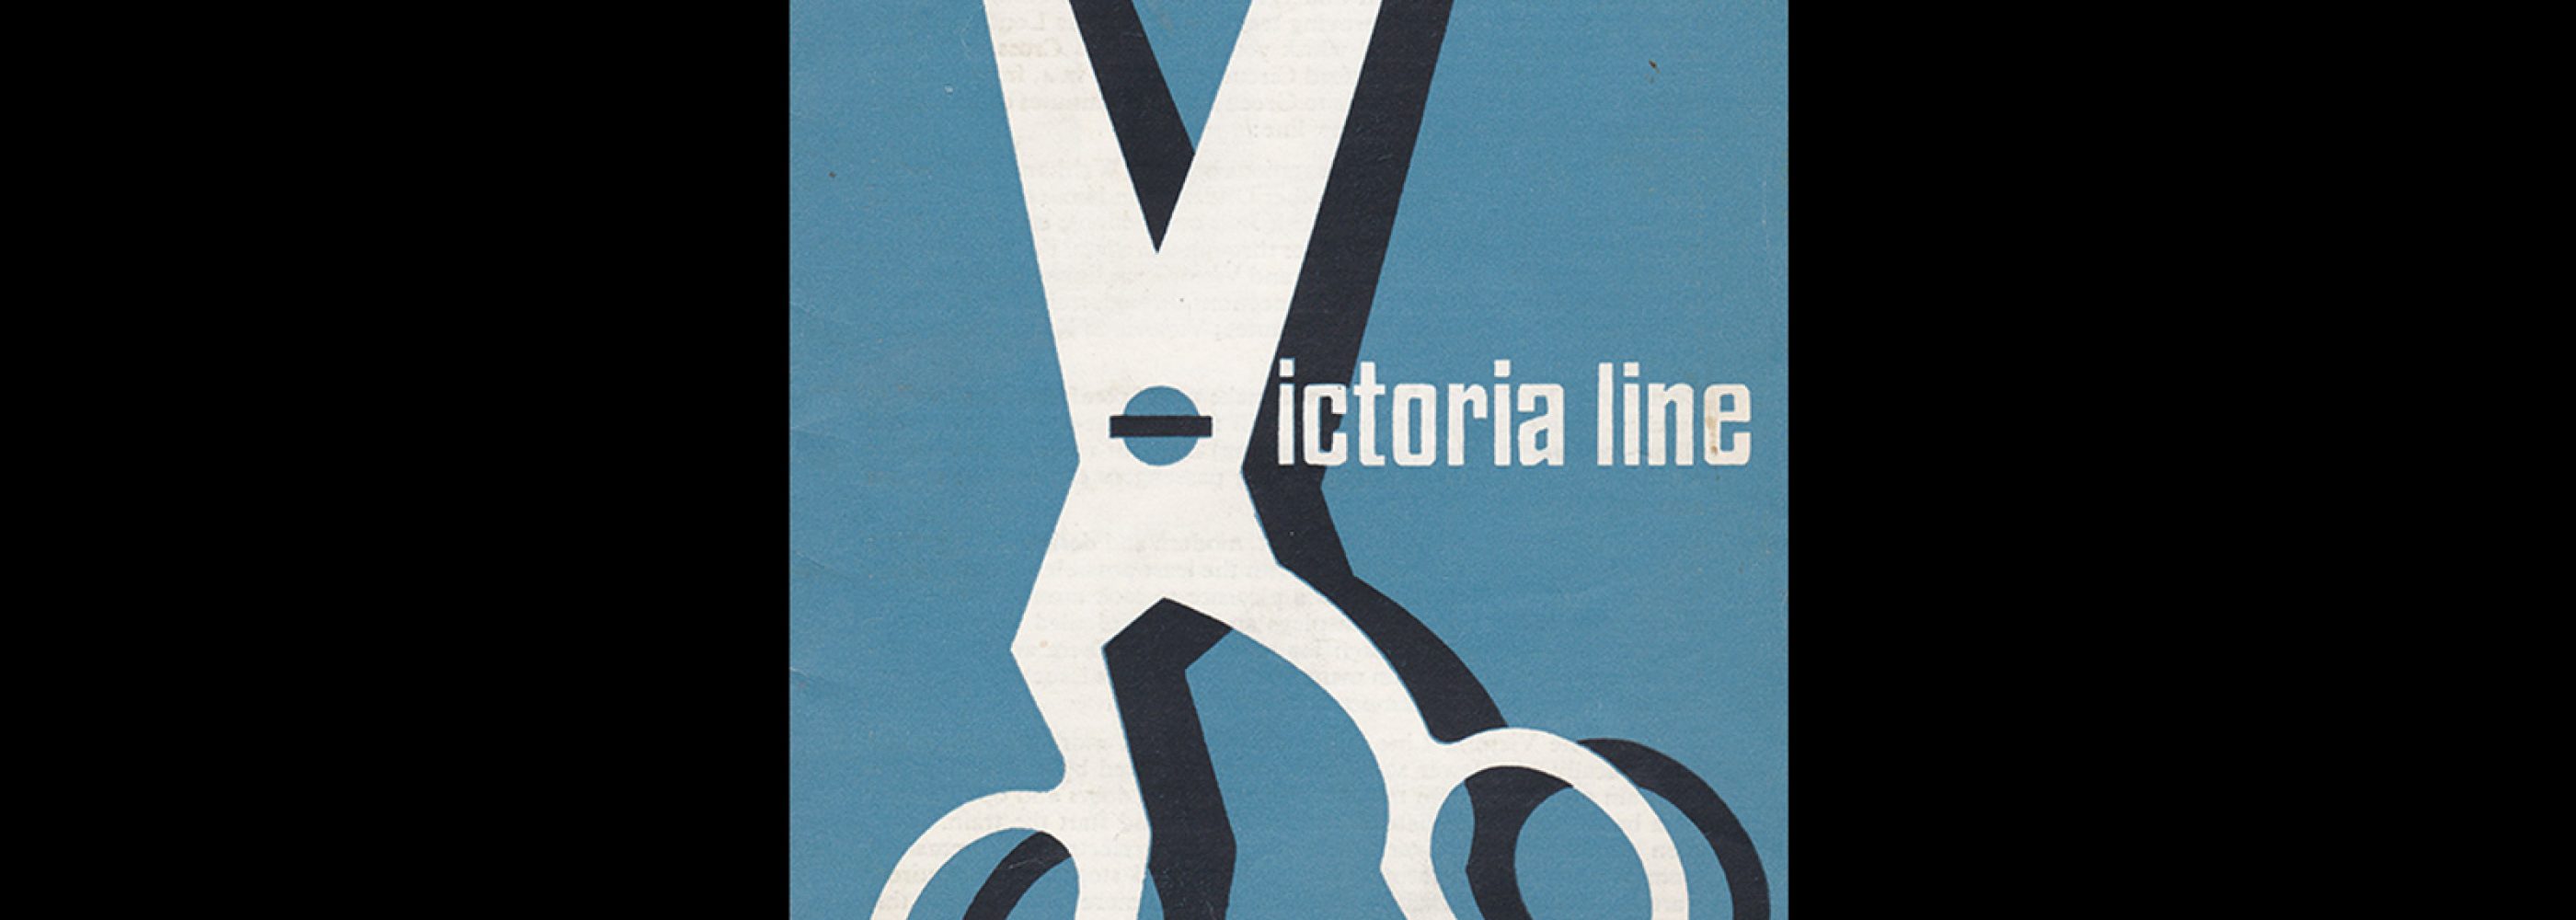 Cut Travel Time - Victoria Line, July 1969. Designed by Tom Eckersley